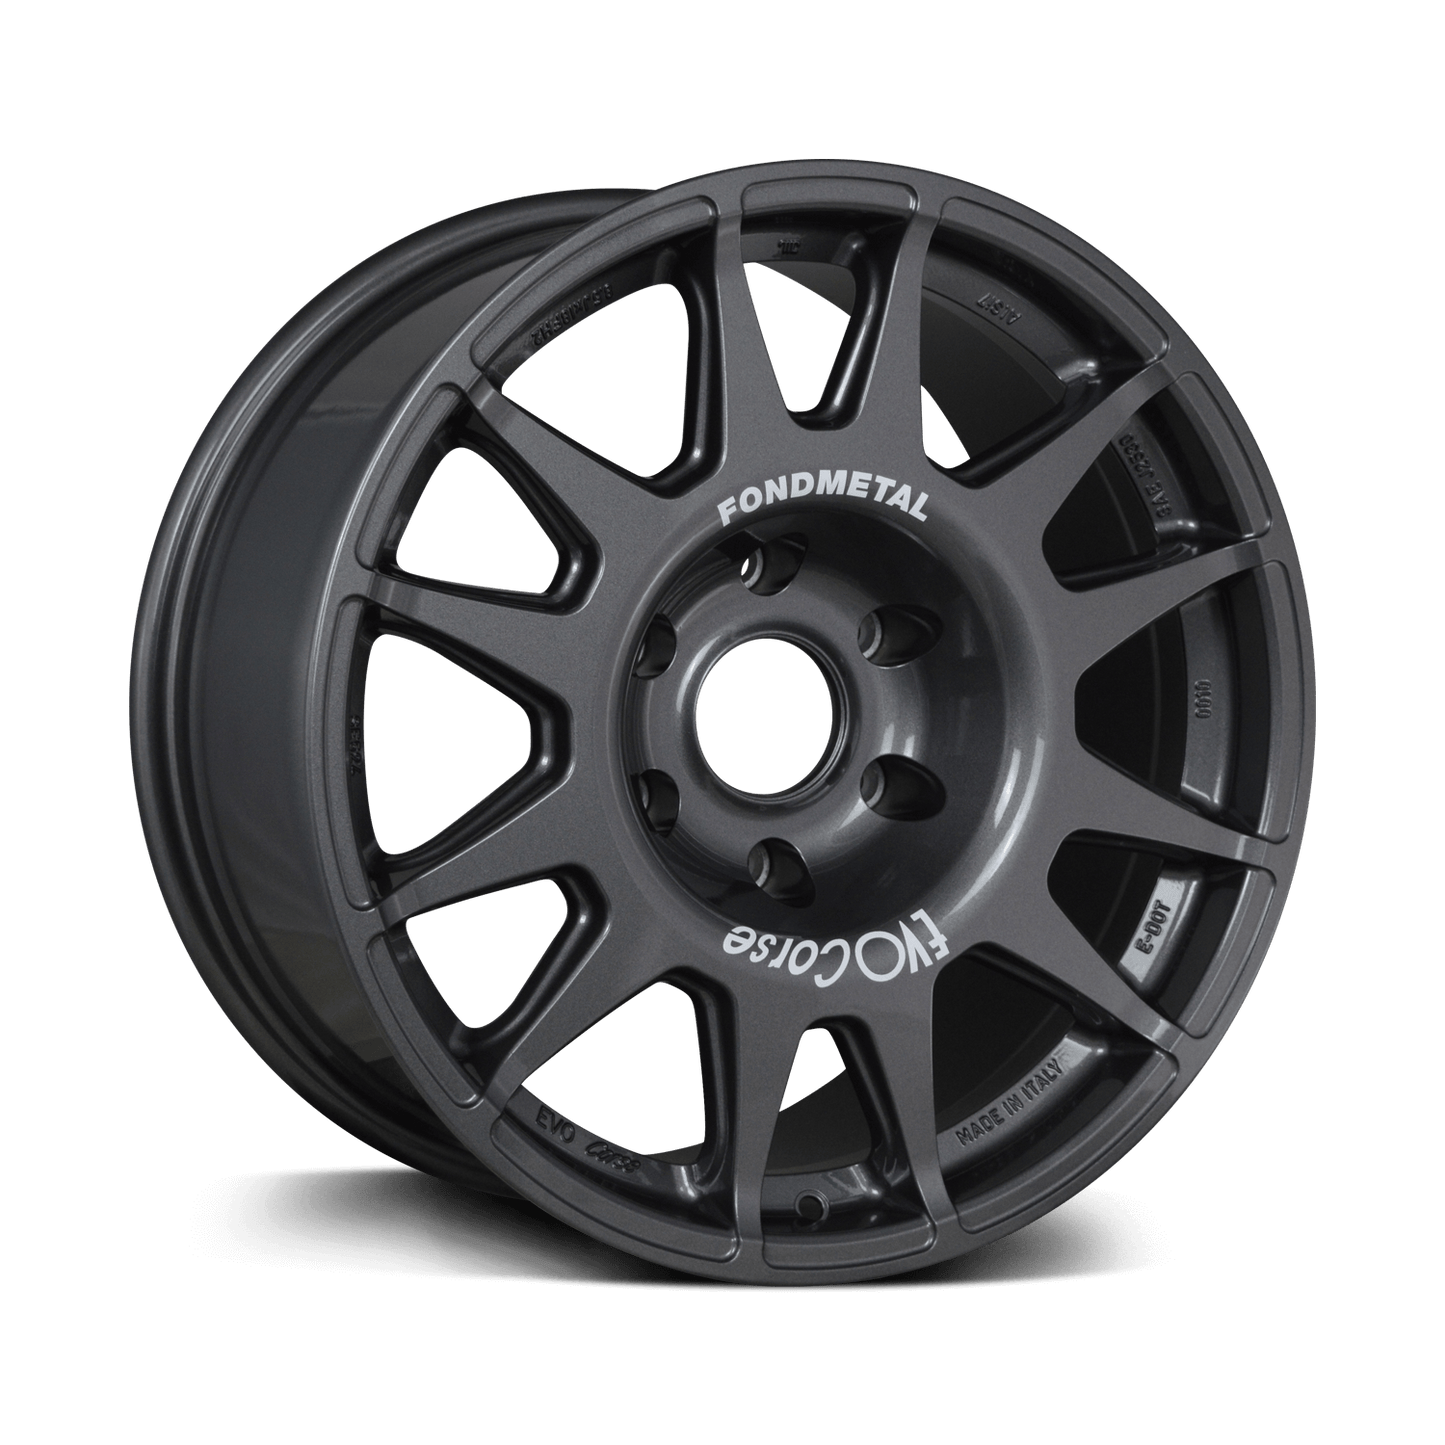 Evo Corse wheel axo view anthracite, for toyota land cruiser 300 series, anthracite. the 4x4 off road allow wheel with the highest high load rating for overlanding, rally, 4wd expedition use in australia